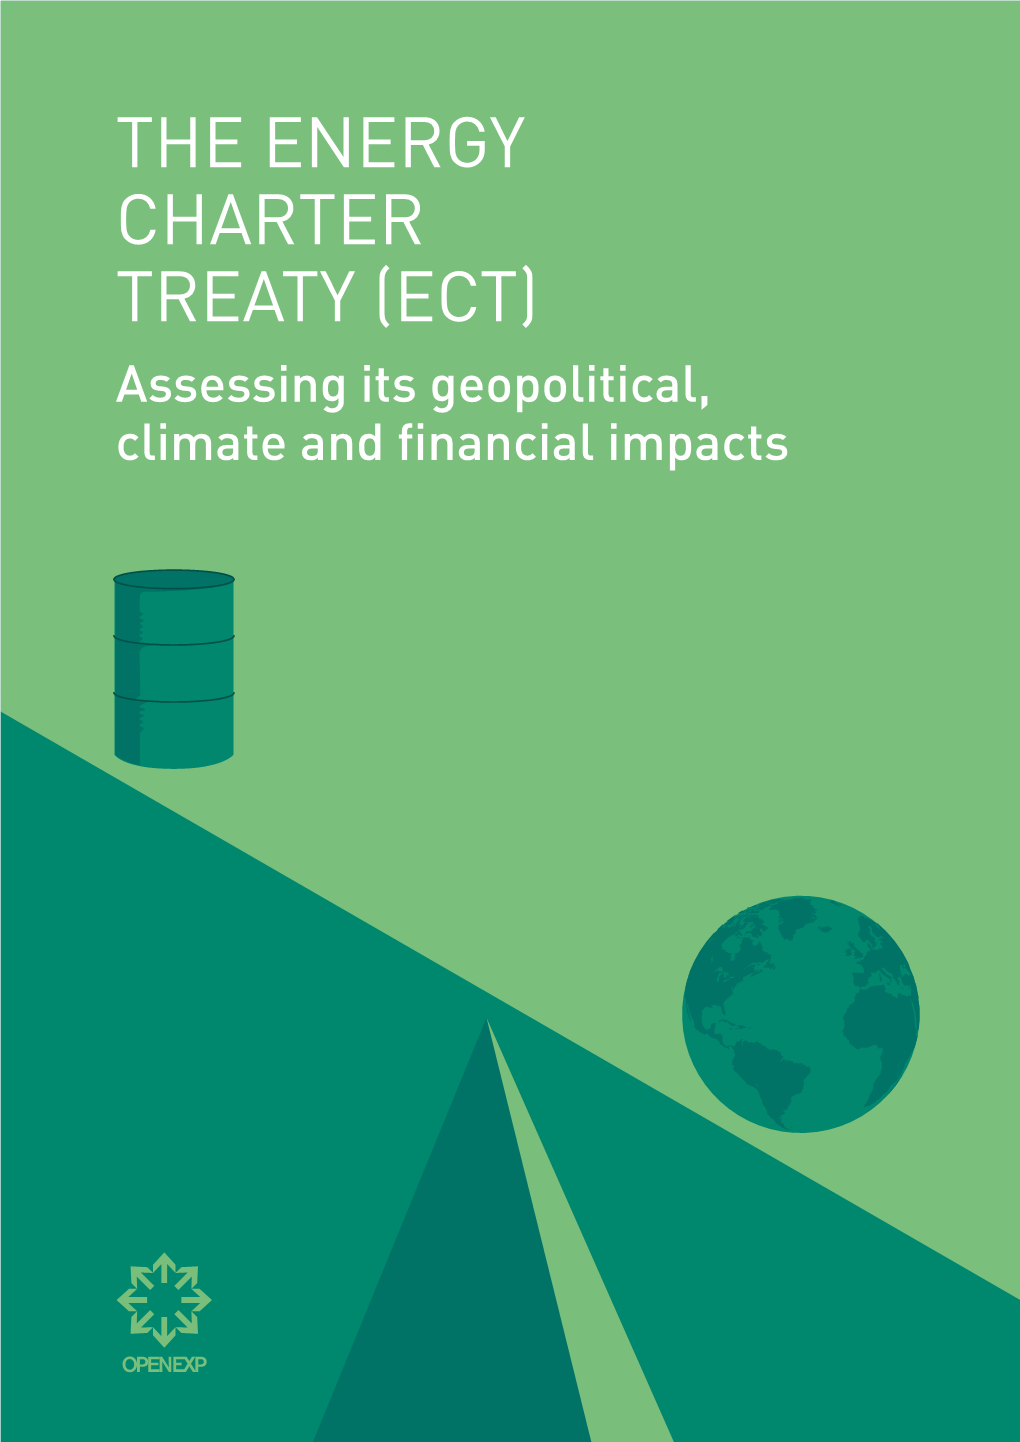 THE ENERGY CHARTER TREATY (ECT) Assessing Its Geopolitical, Climate and Financial Impacts the ENERGY CHARTER TREATY (ECT) 2